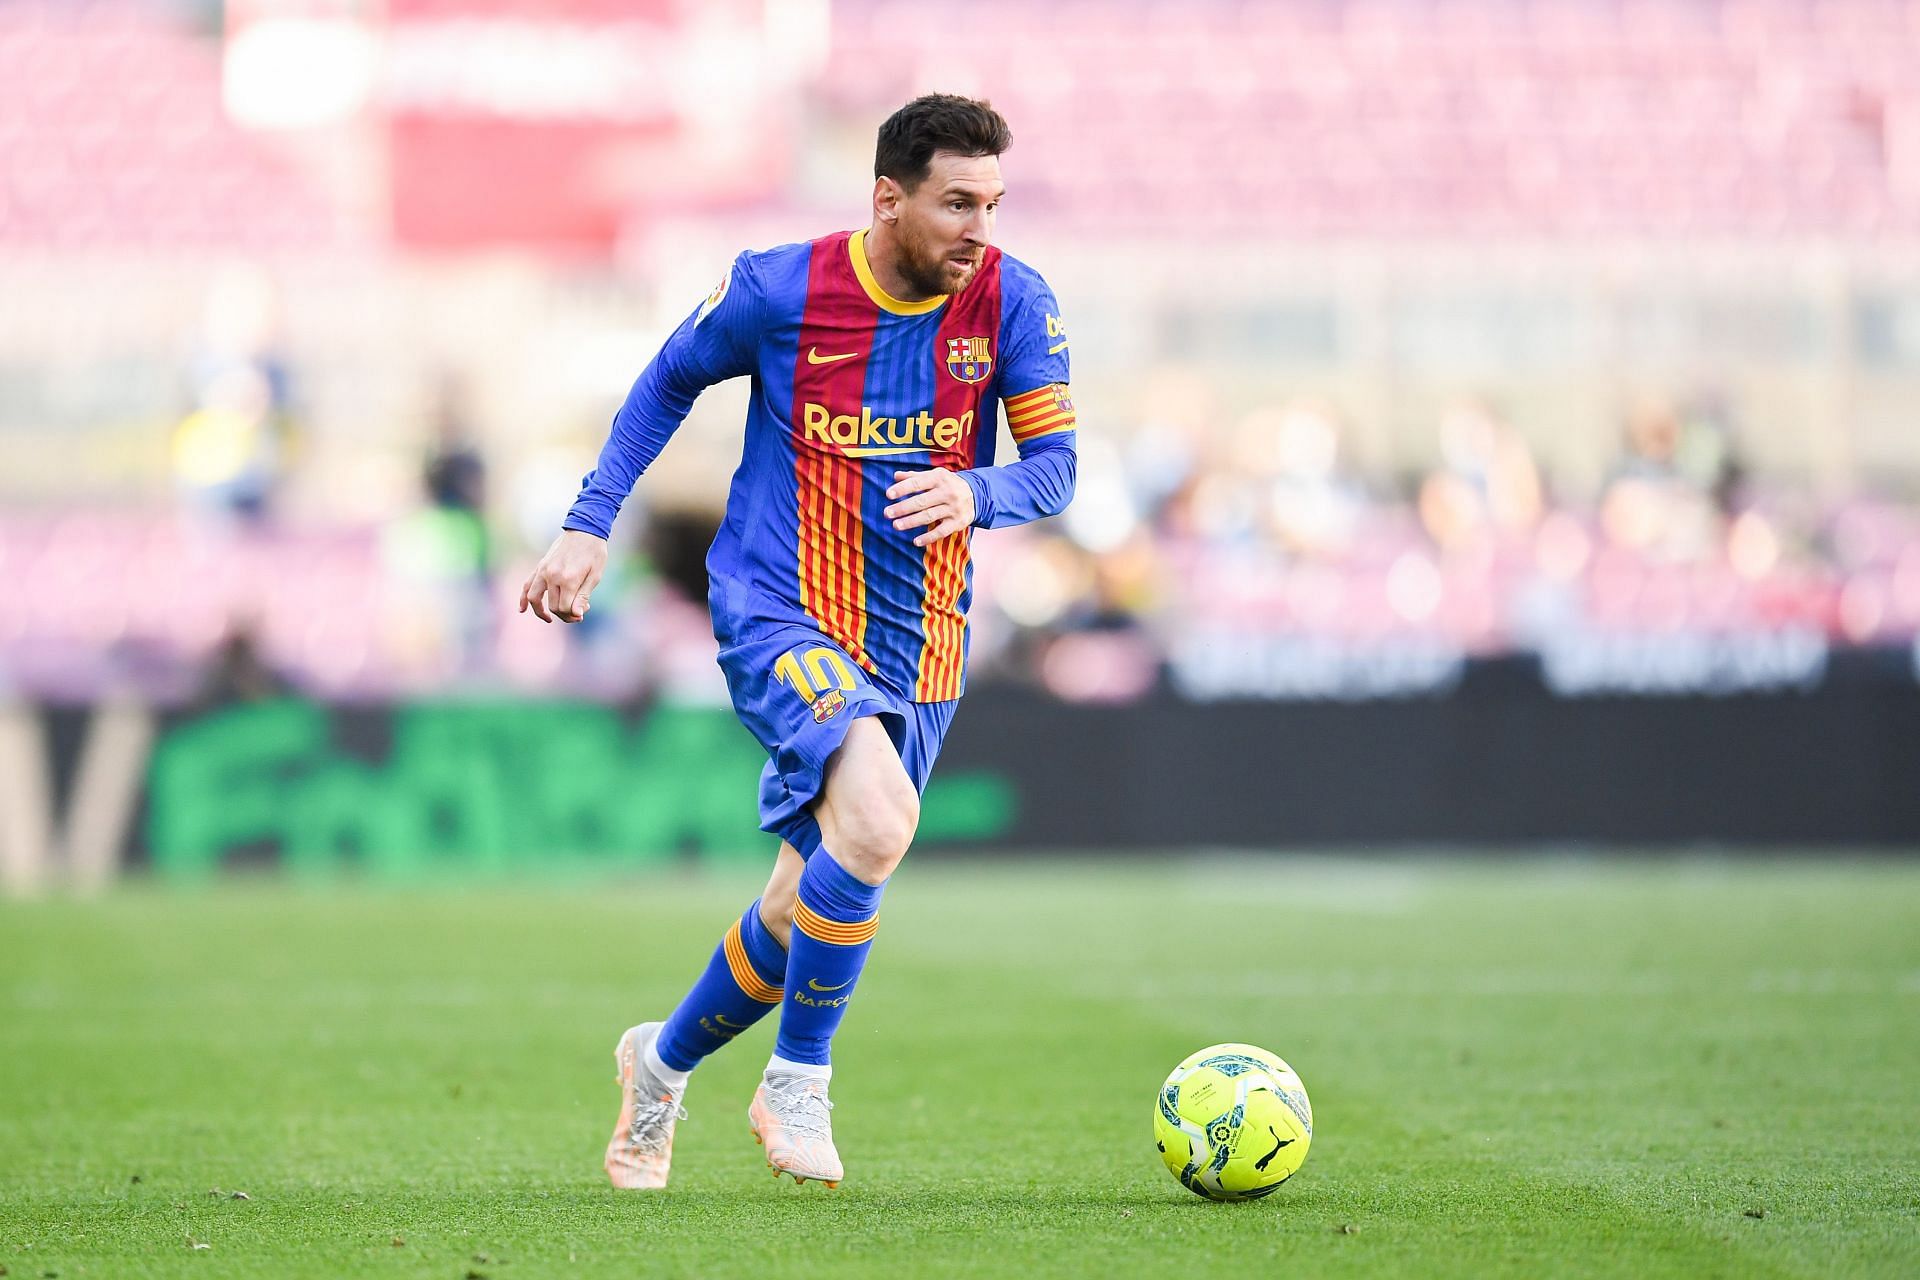 lionel-messi-wanted-current-barcelona-star-to-leave-as-he-wasn-t-comfortable-playing-with-him-reports